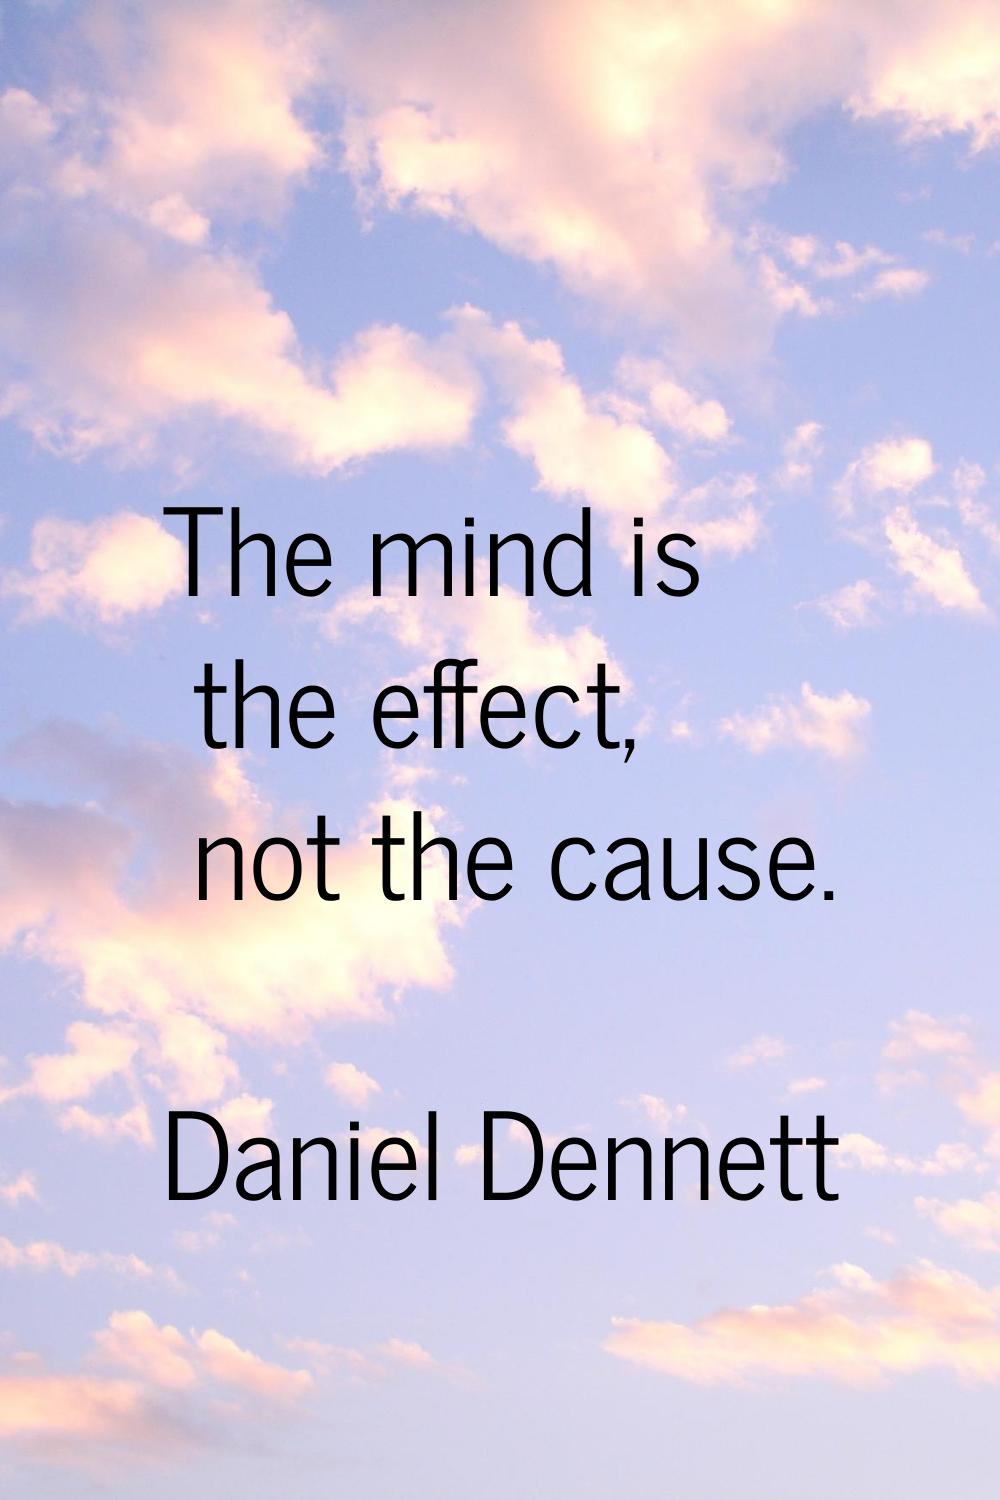 The mind is the effect, not the cause.